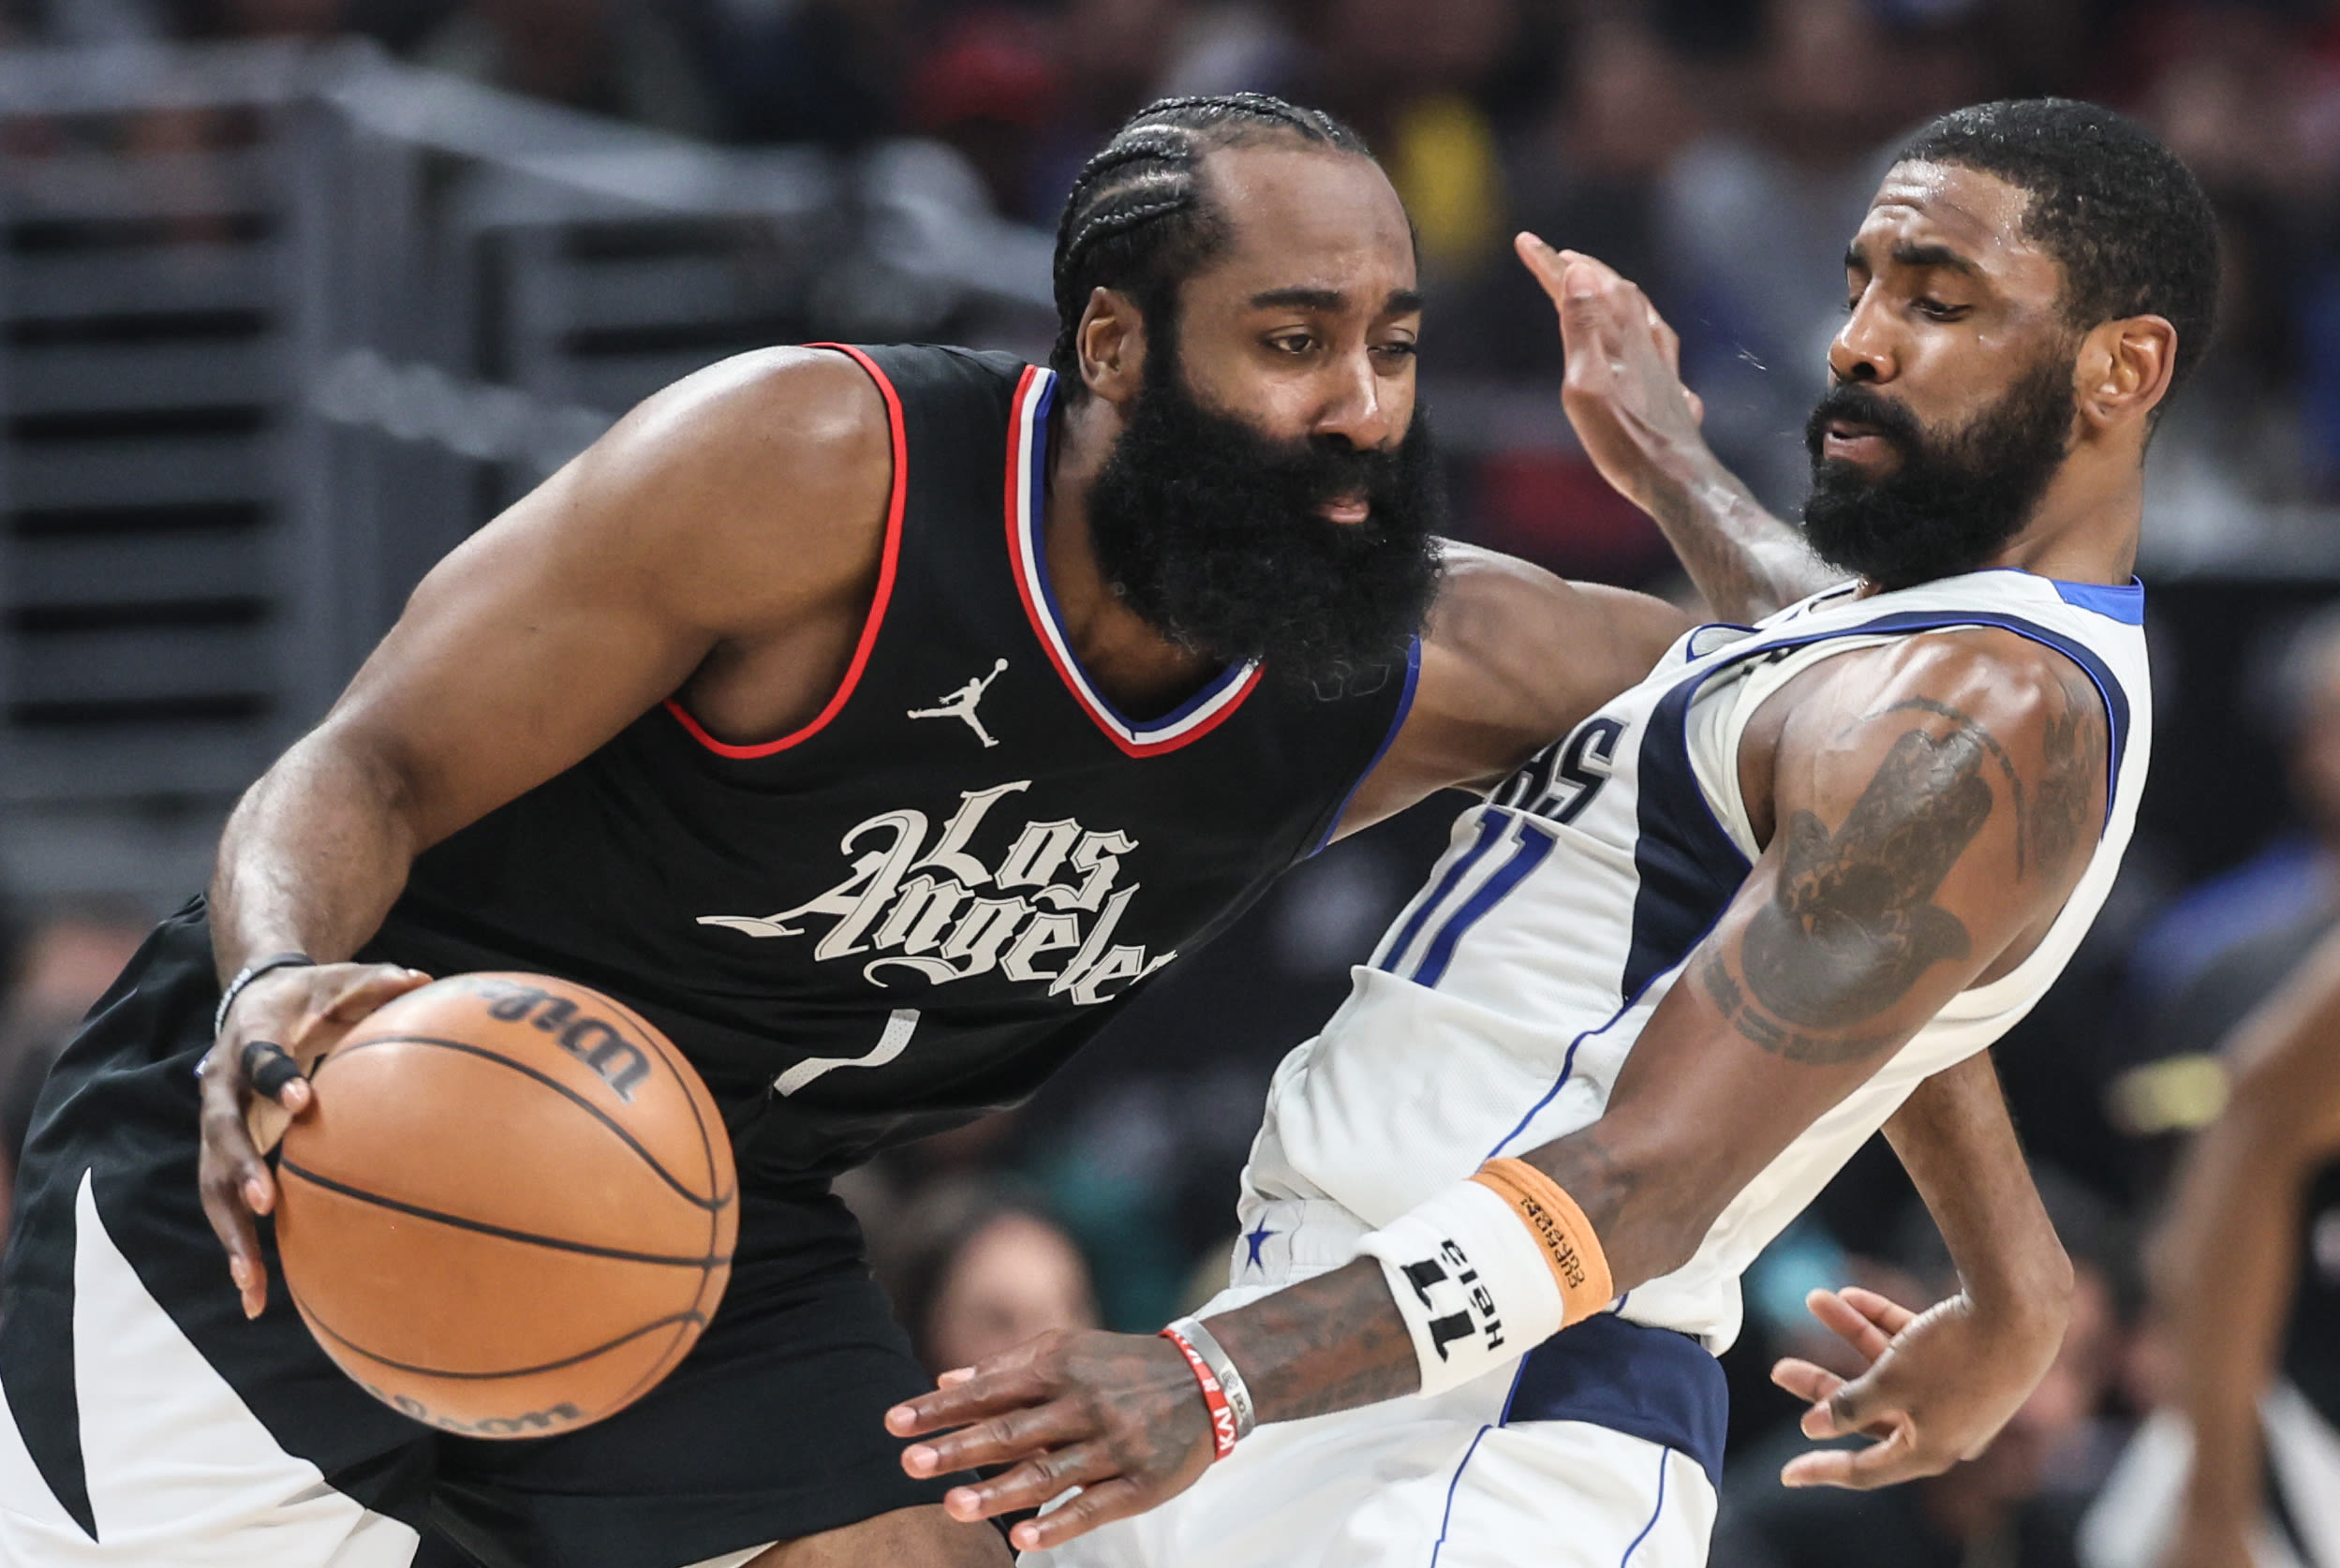 The Sports Report: Watch James Harden disappear into thin air